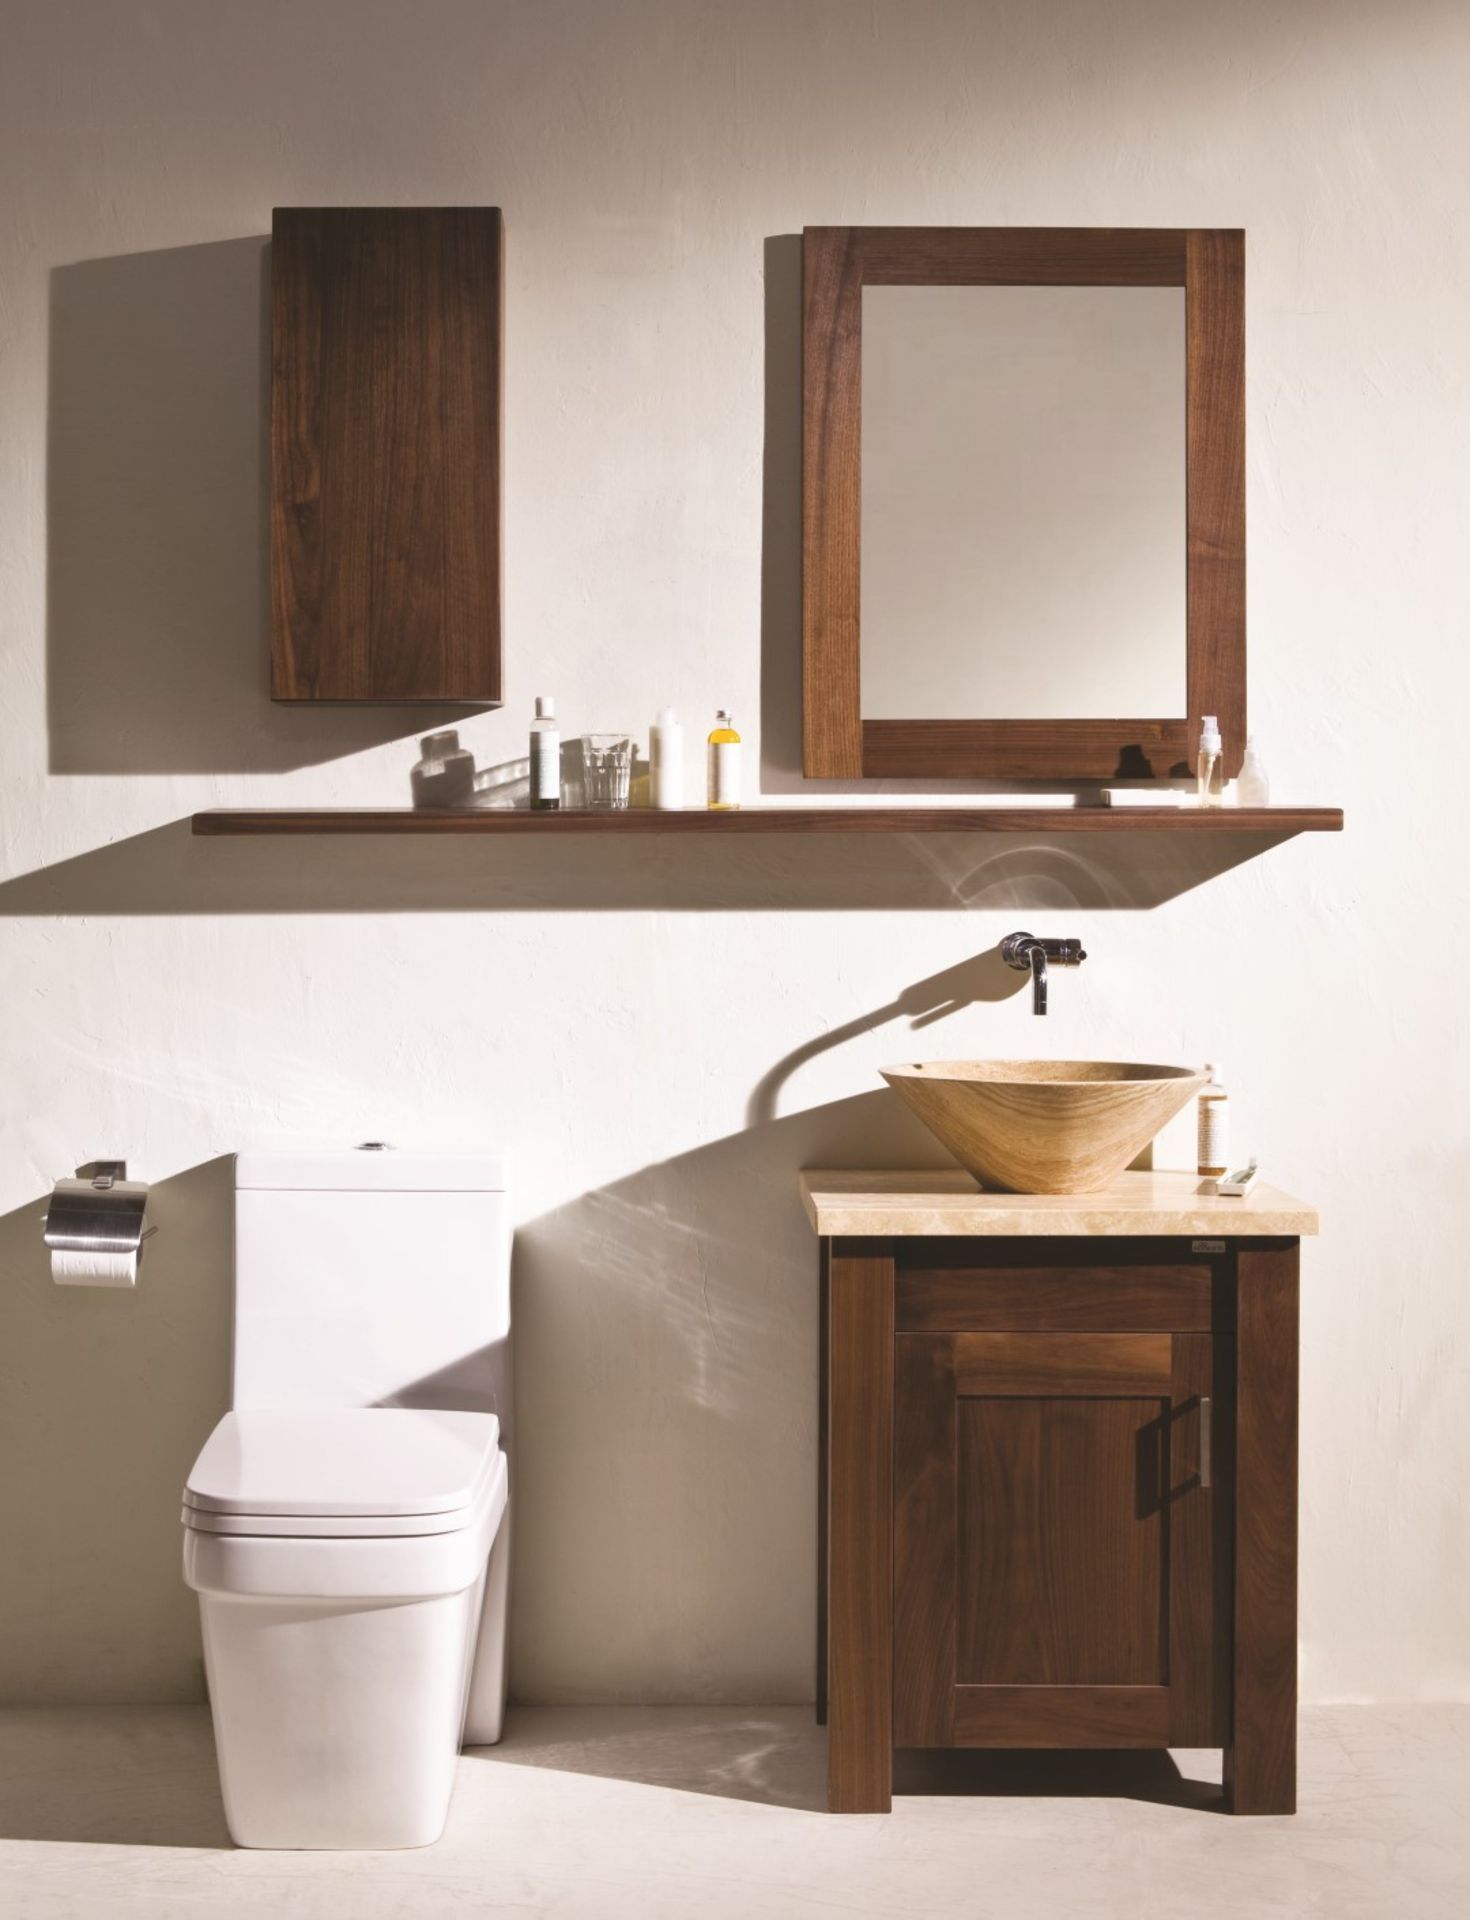 1 x Stonearth Bathroom Storage Shelf With Concealed Brackets - American Solid Walnut - Size: 600mm - Image 6 of 16